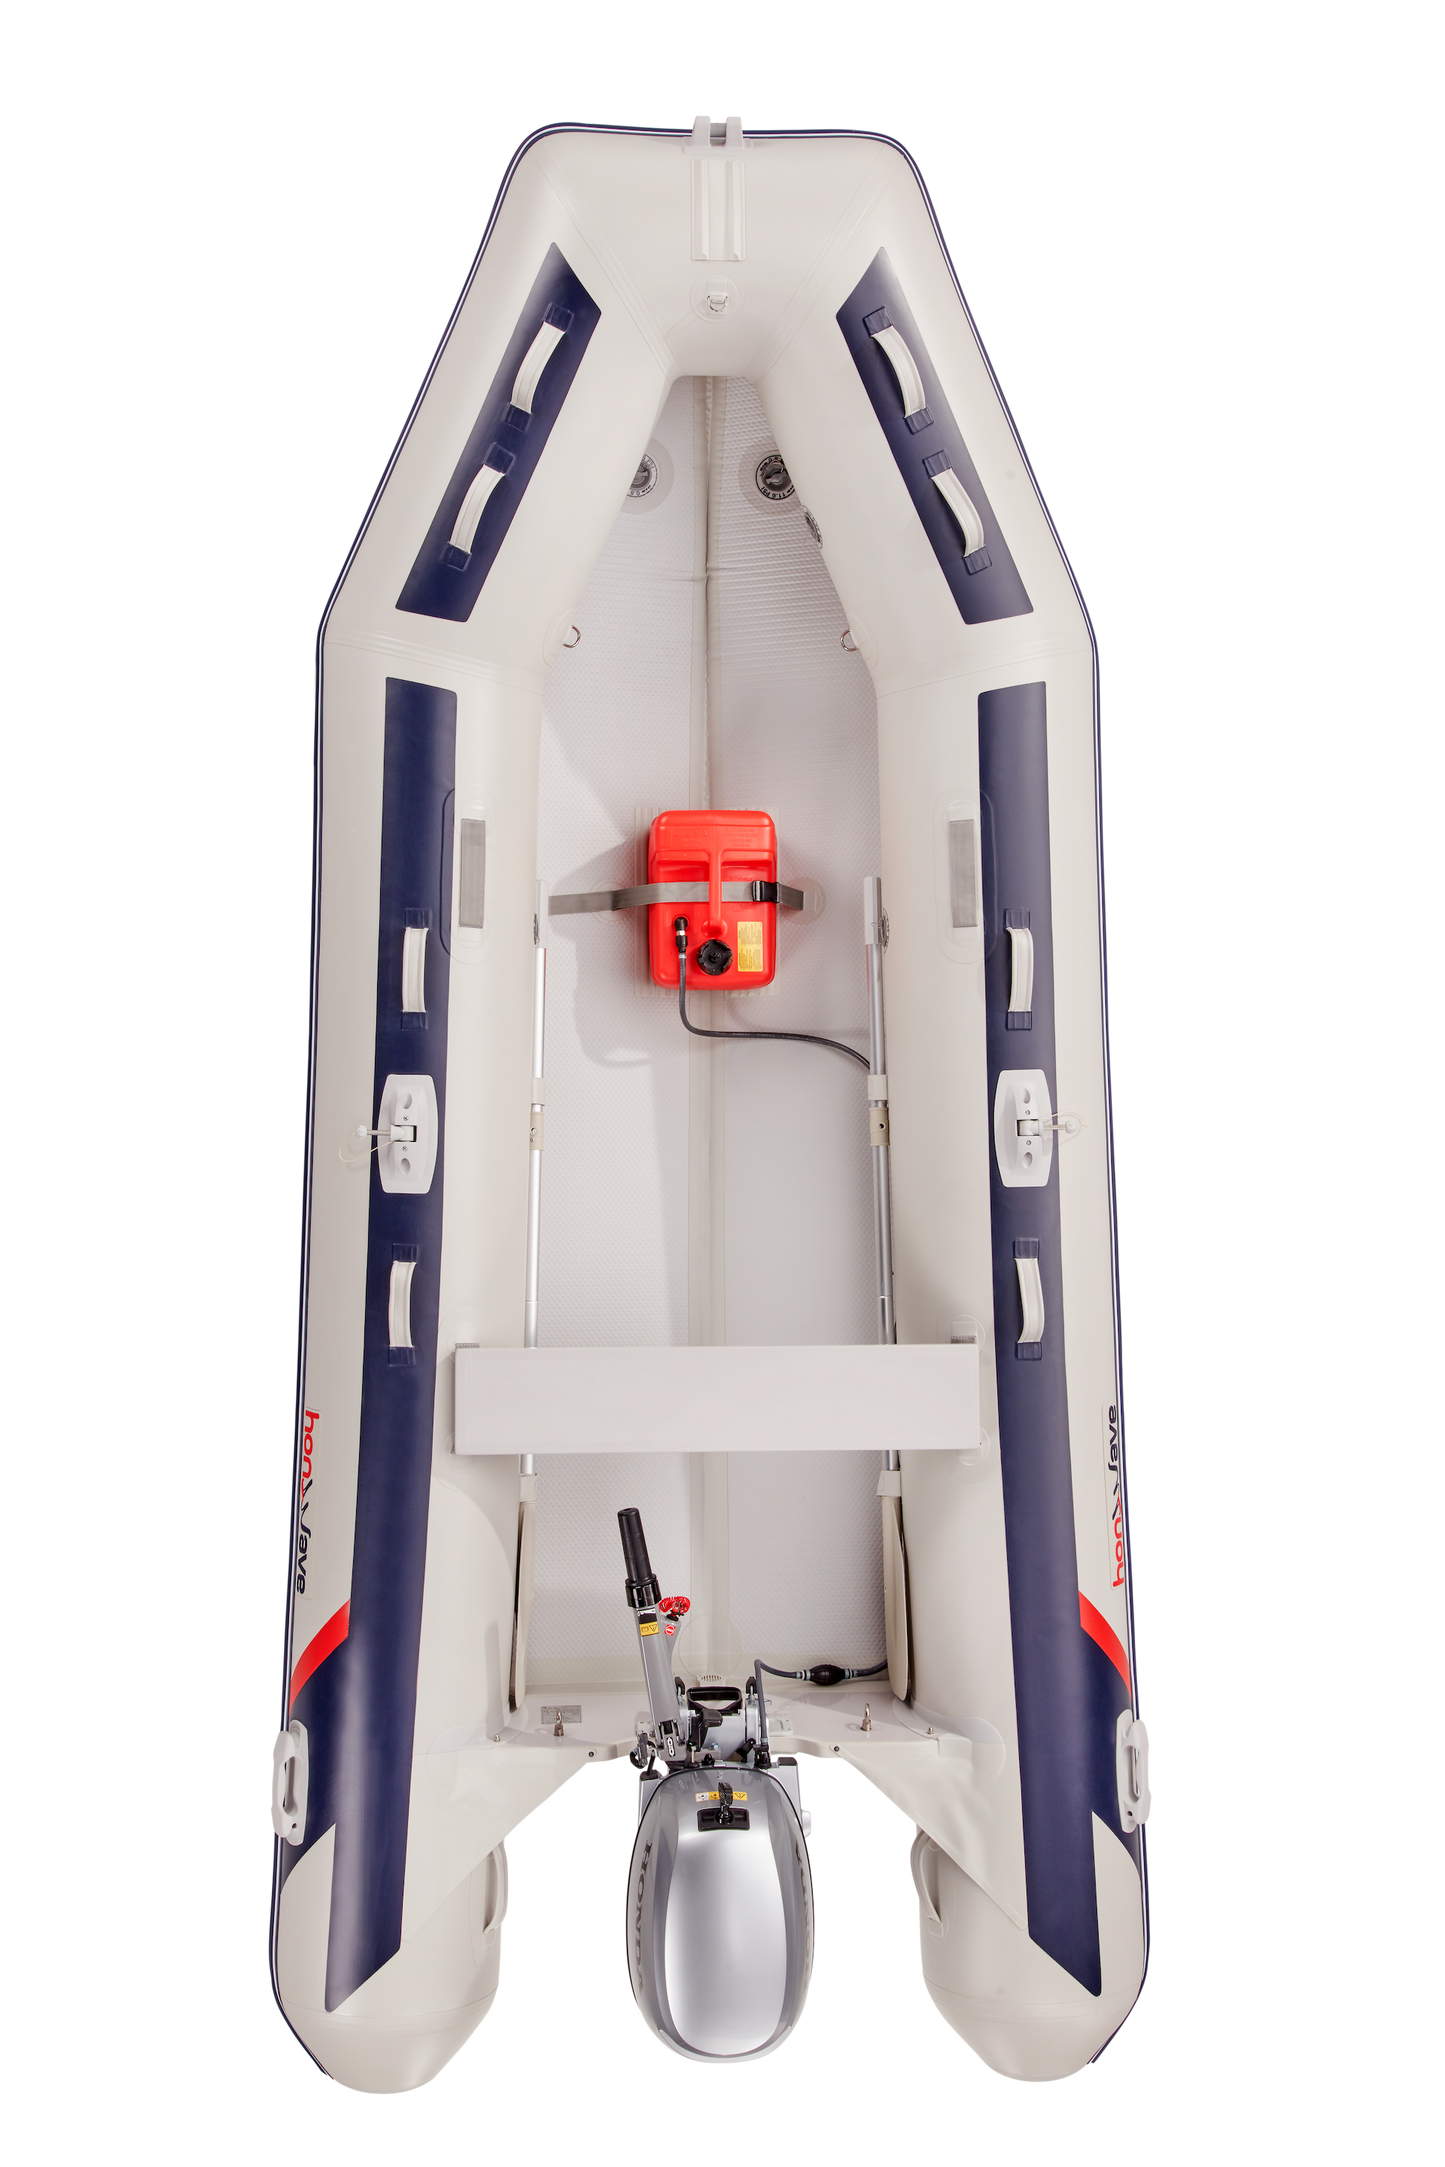 Honwave Package - T32IE3 3.2m Inflatable Boat Dinghy Air V-Floor & Honda Bf4 4hp Outboard Engine